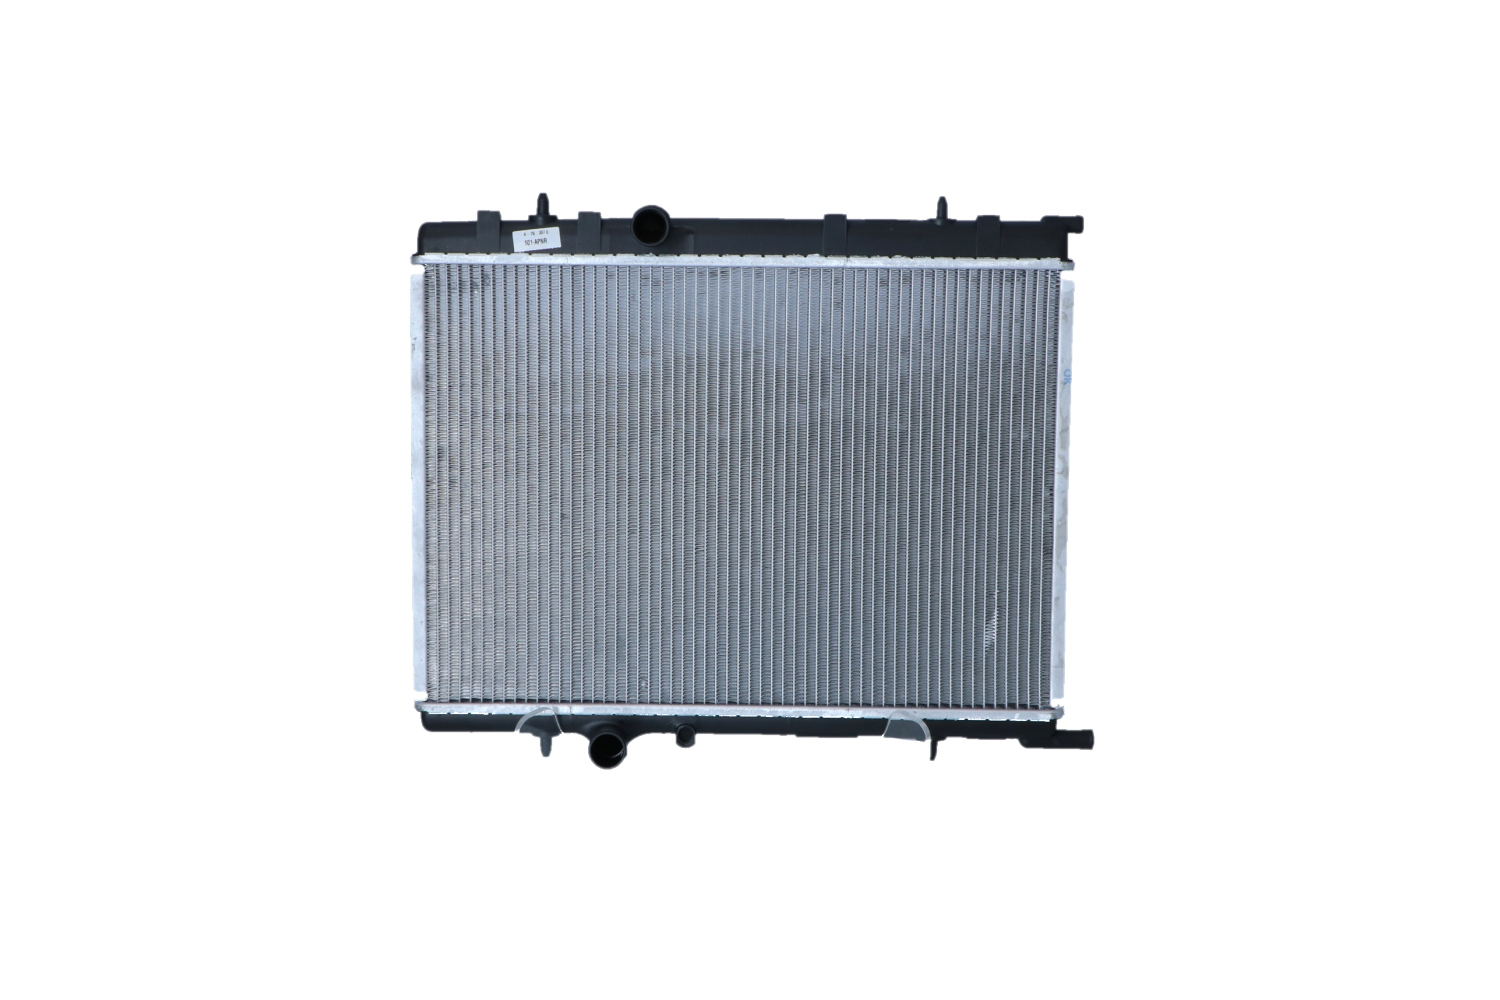 NRF EASY FIT Aluminium, 563 x 379 x 29 mm, with mounting parts, Brazed cooling fins Radiator 58308 buy